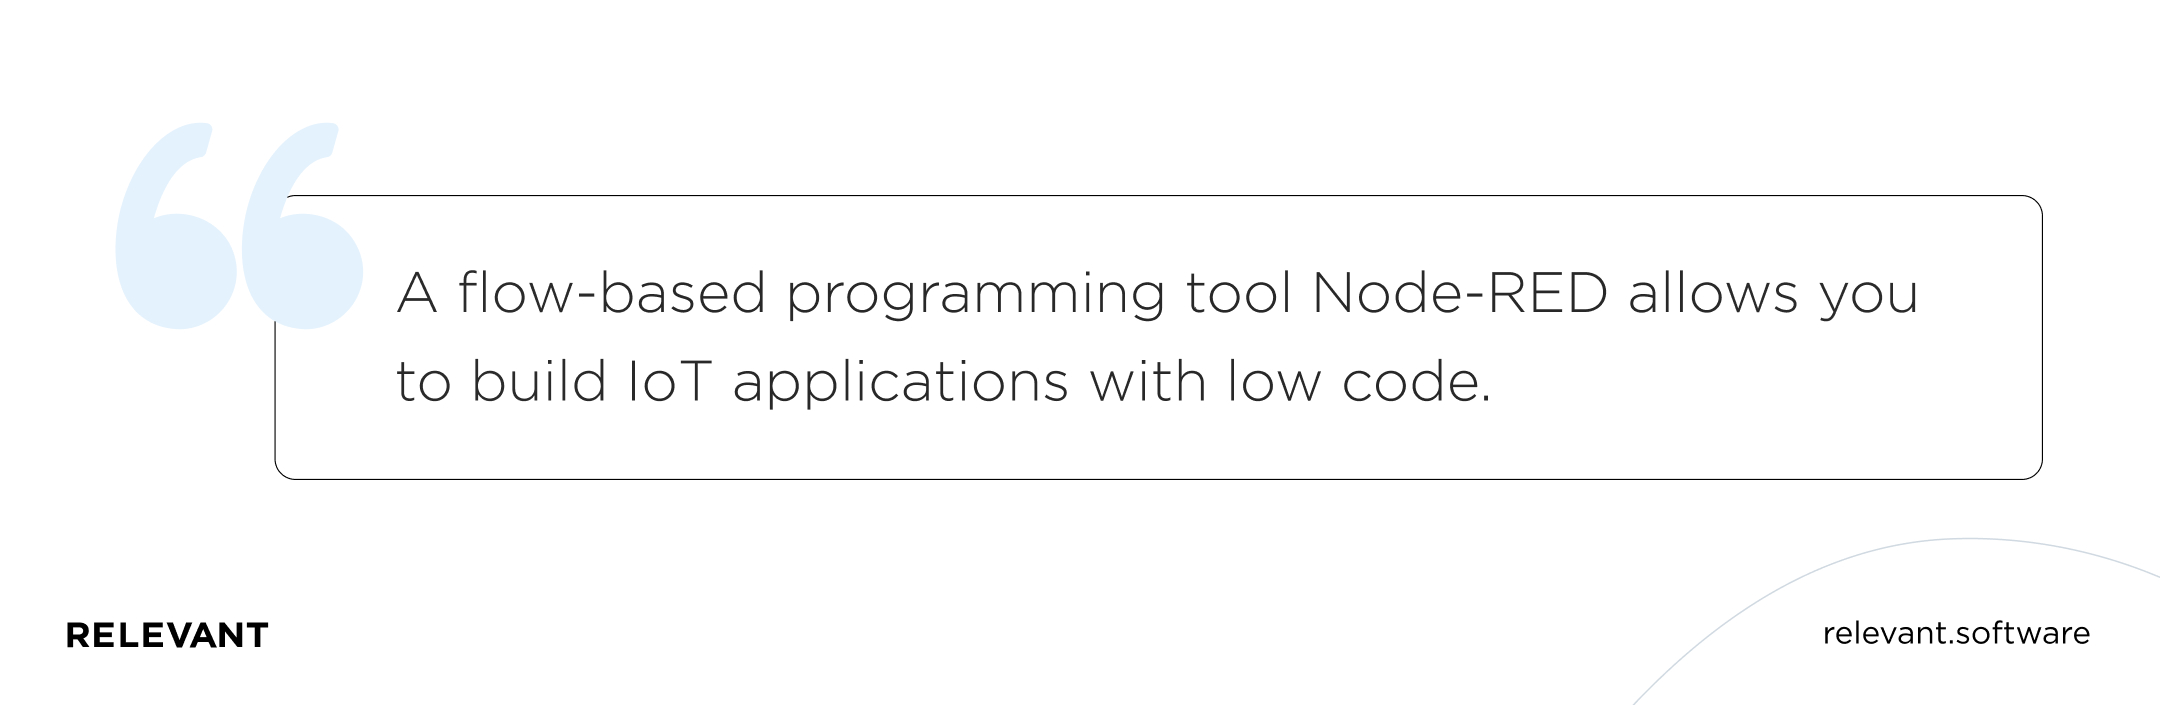 Node-RED allows you to build IoT applications with low code